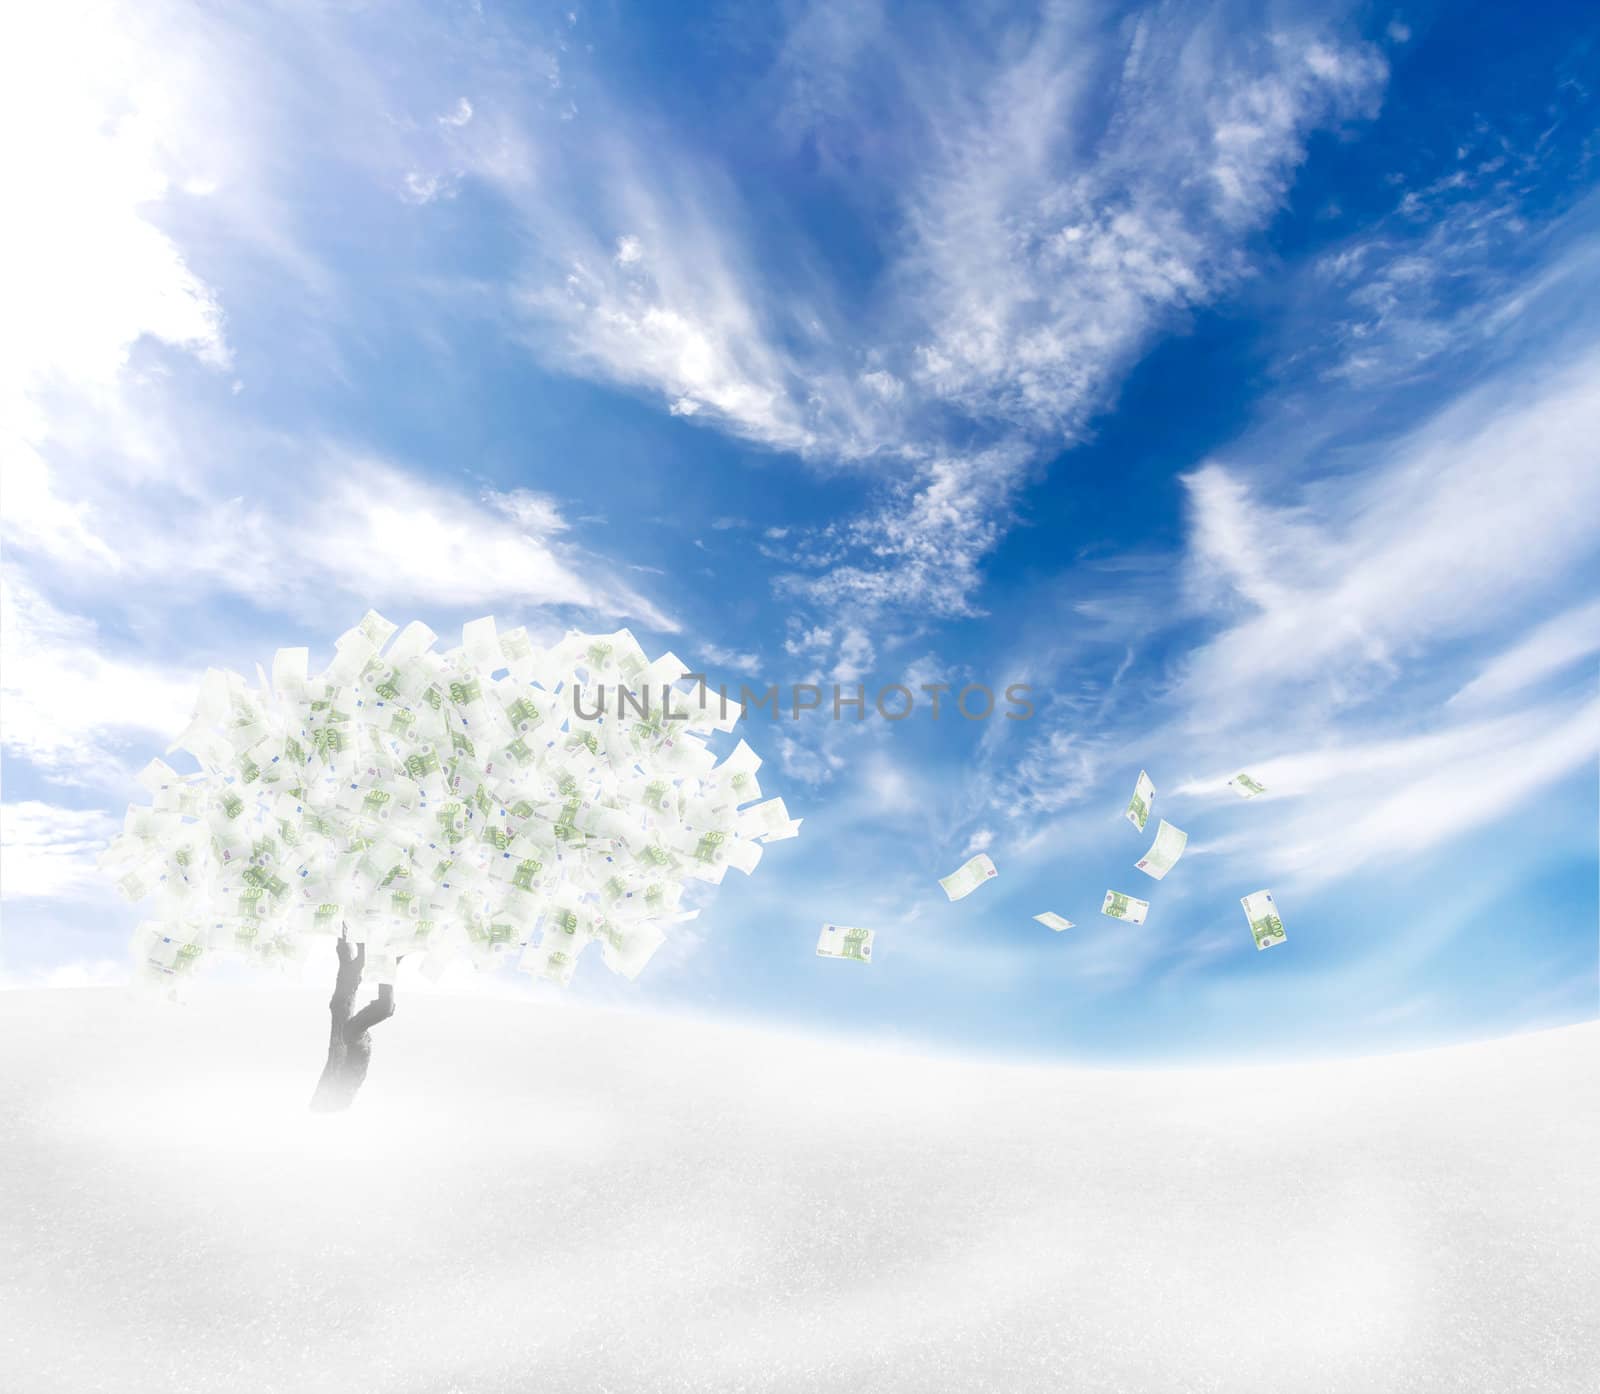 Beautiful scenery with cash tree with falling banknote leaves. Freezing wind crisis concept.